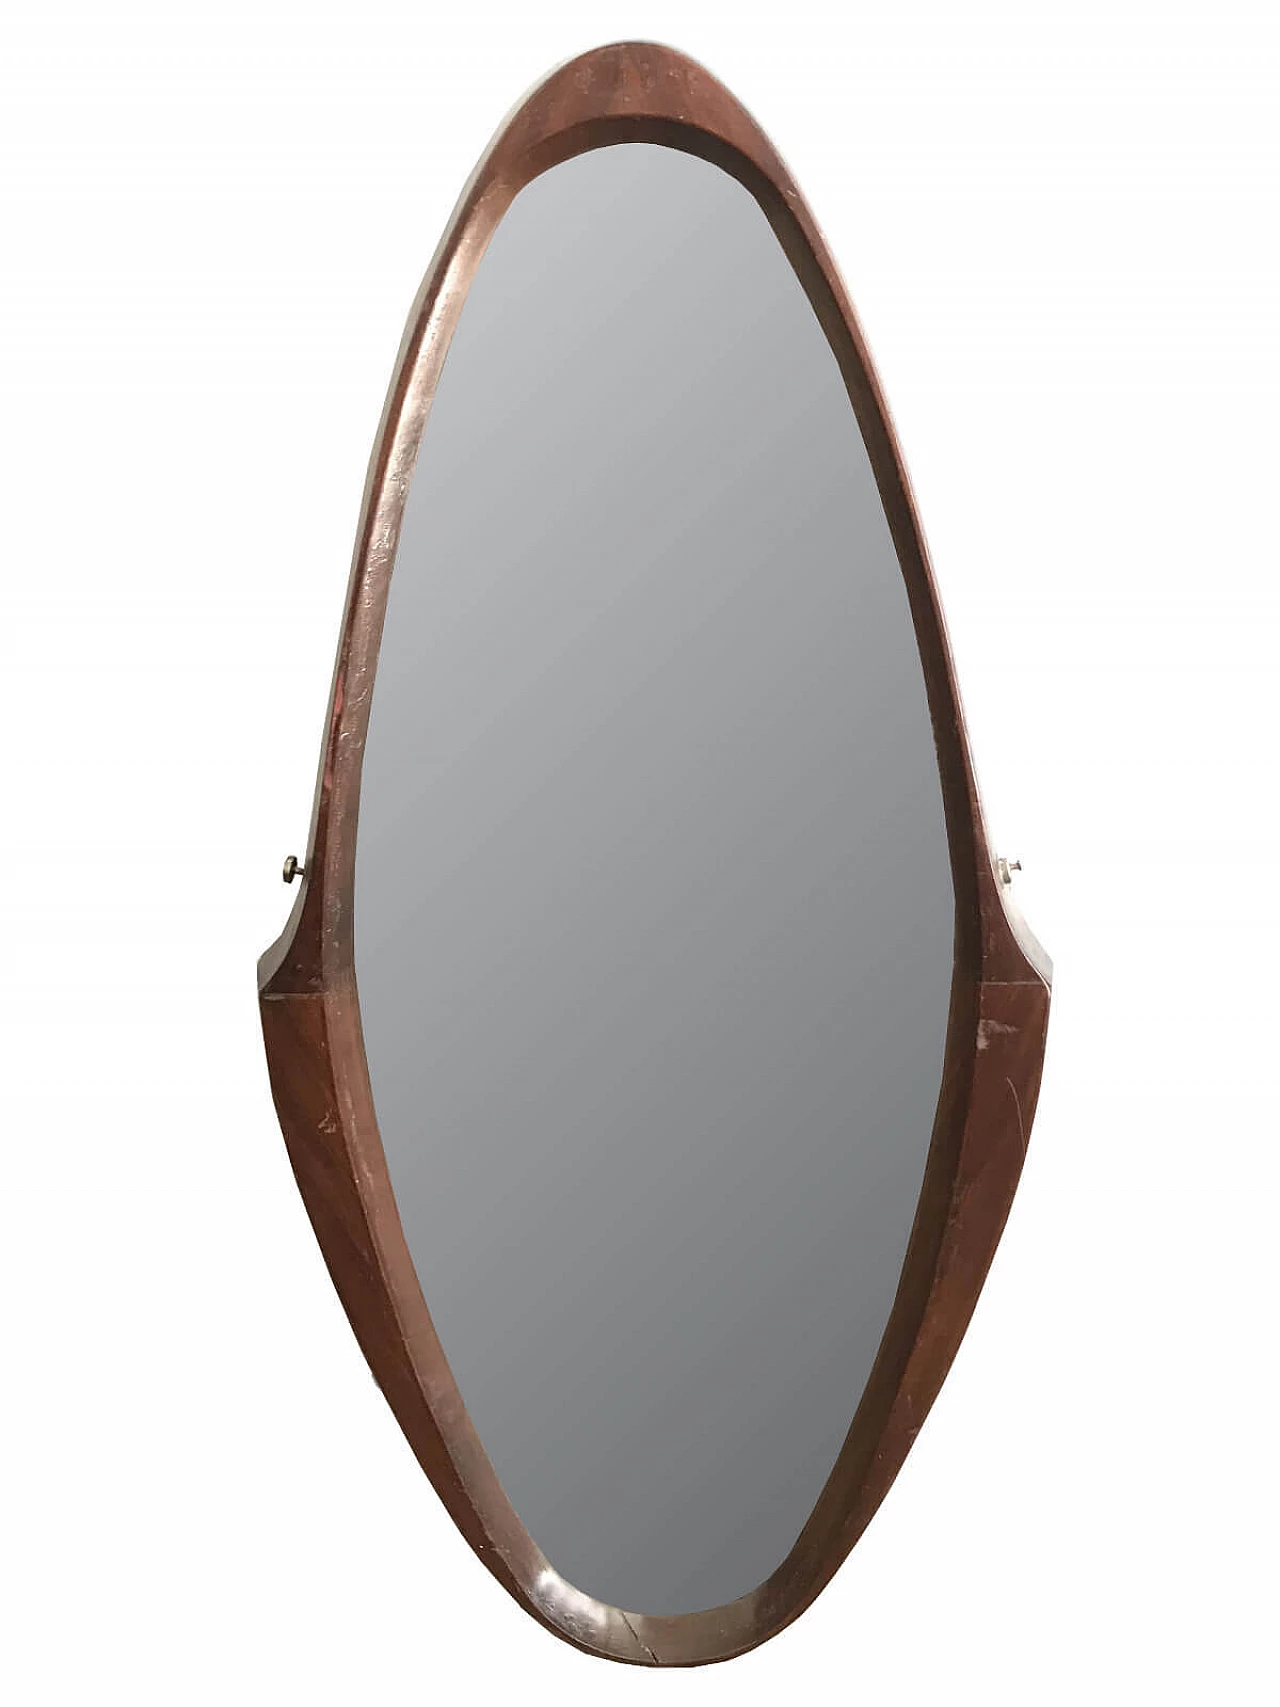 Drop-shaped mirror in shaped wood frame 5